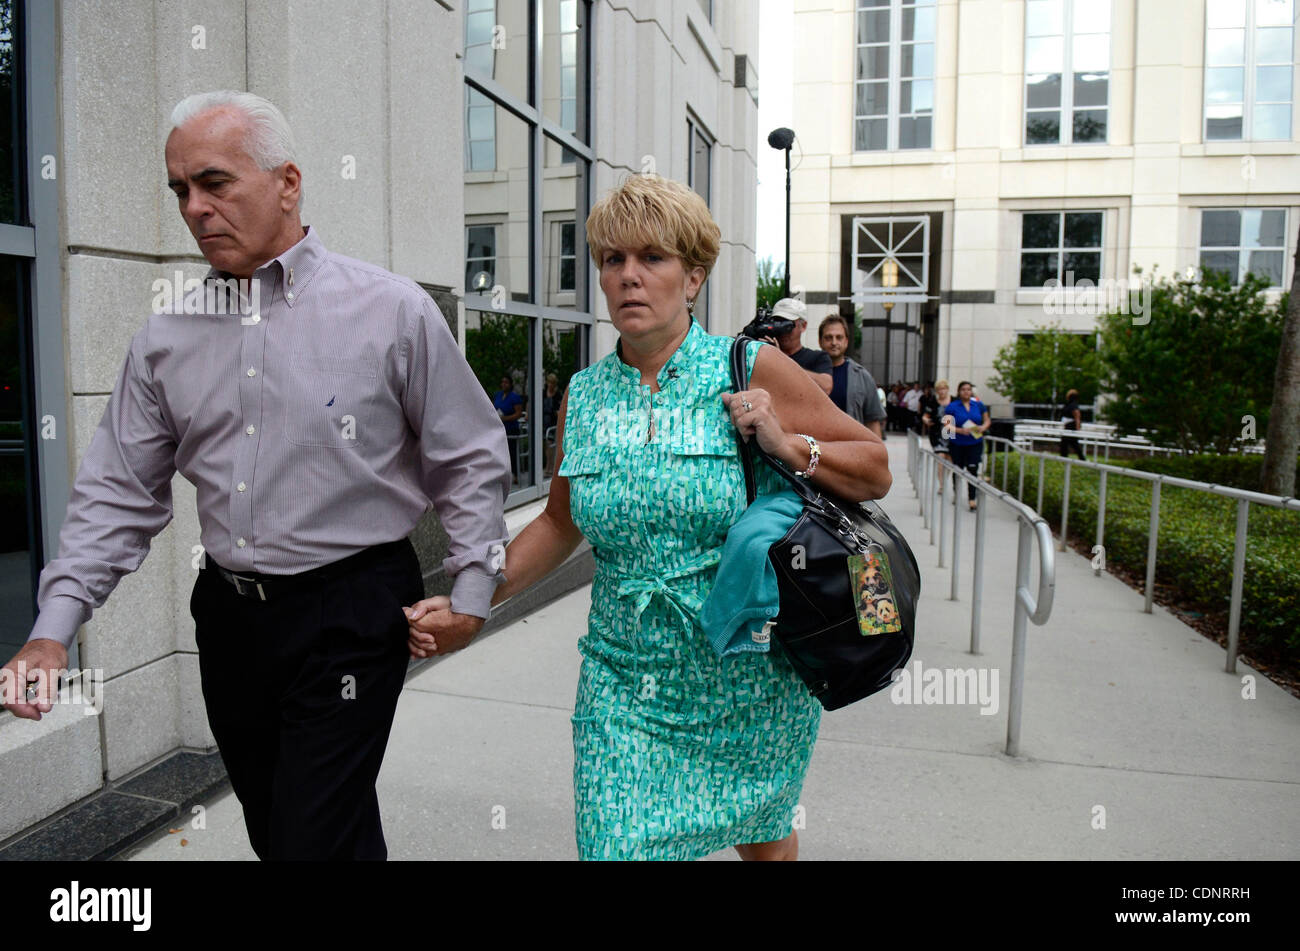 June 27, 2011 - Orlando, Florida, U.S. - GEORGE ANTHONY, left, and CINDY ANTHONY, parents of Casey Anthony, walk to the entrance of the Orange County Courthouse during the Casey Anthony murder trial. Casey Anthony is charged with killing her two-year-old daughter Caylee in 2008. (Credit Image: &#169 Stock Photo